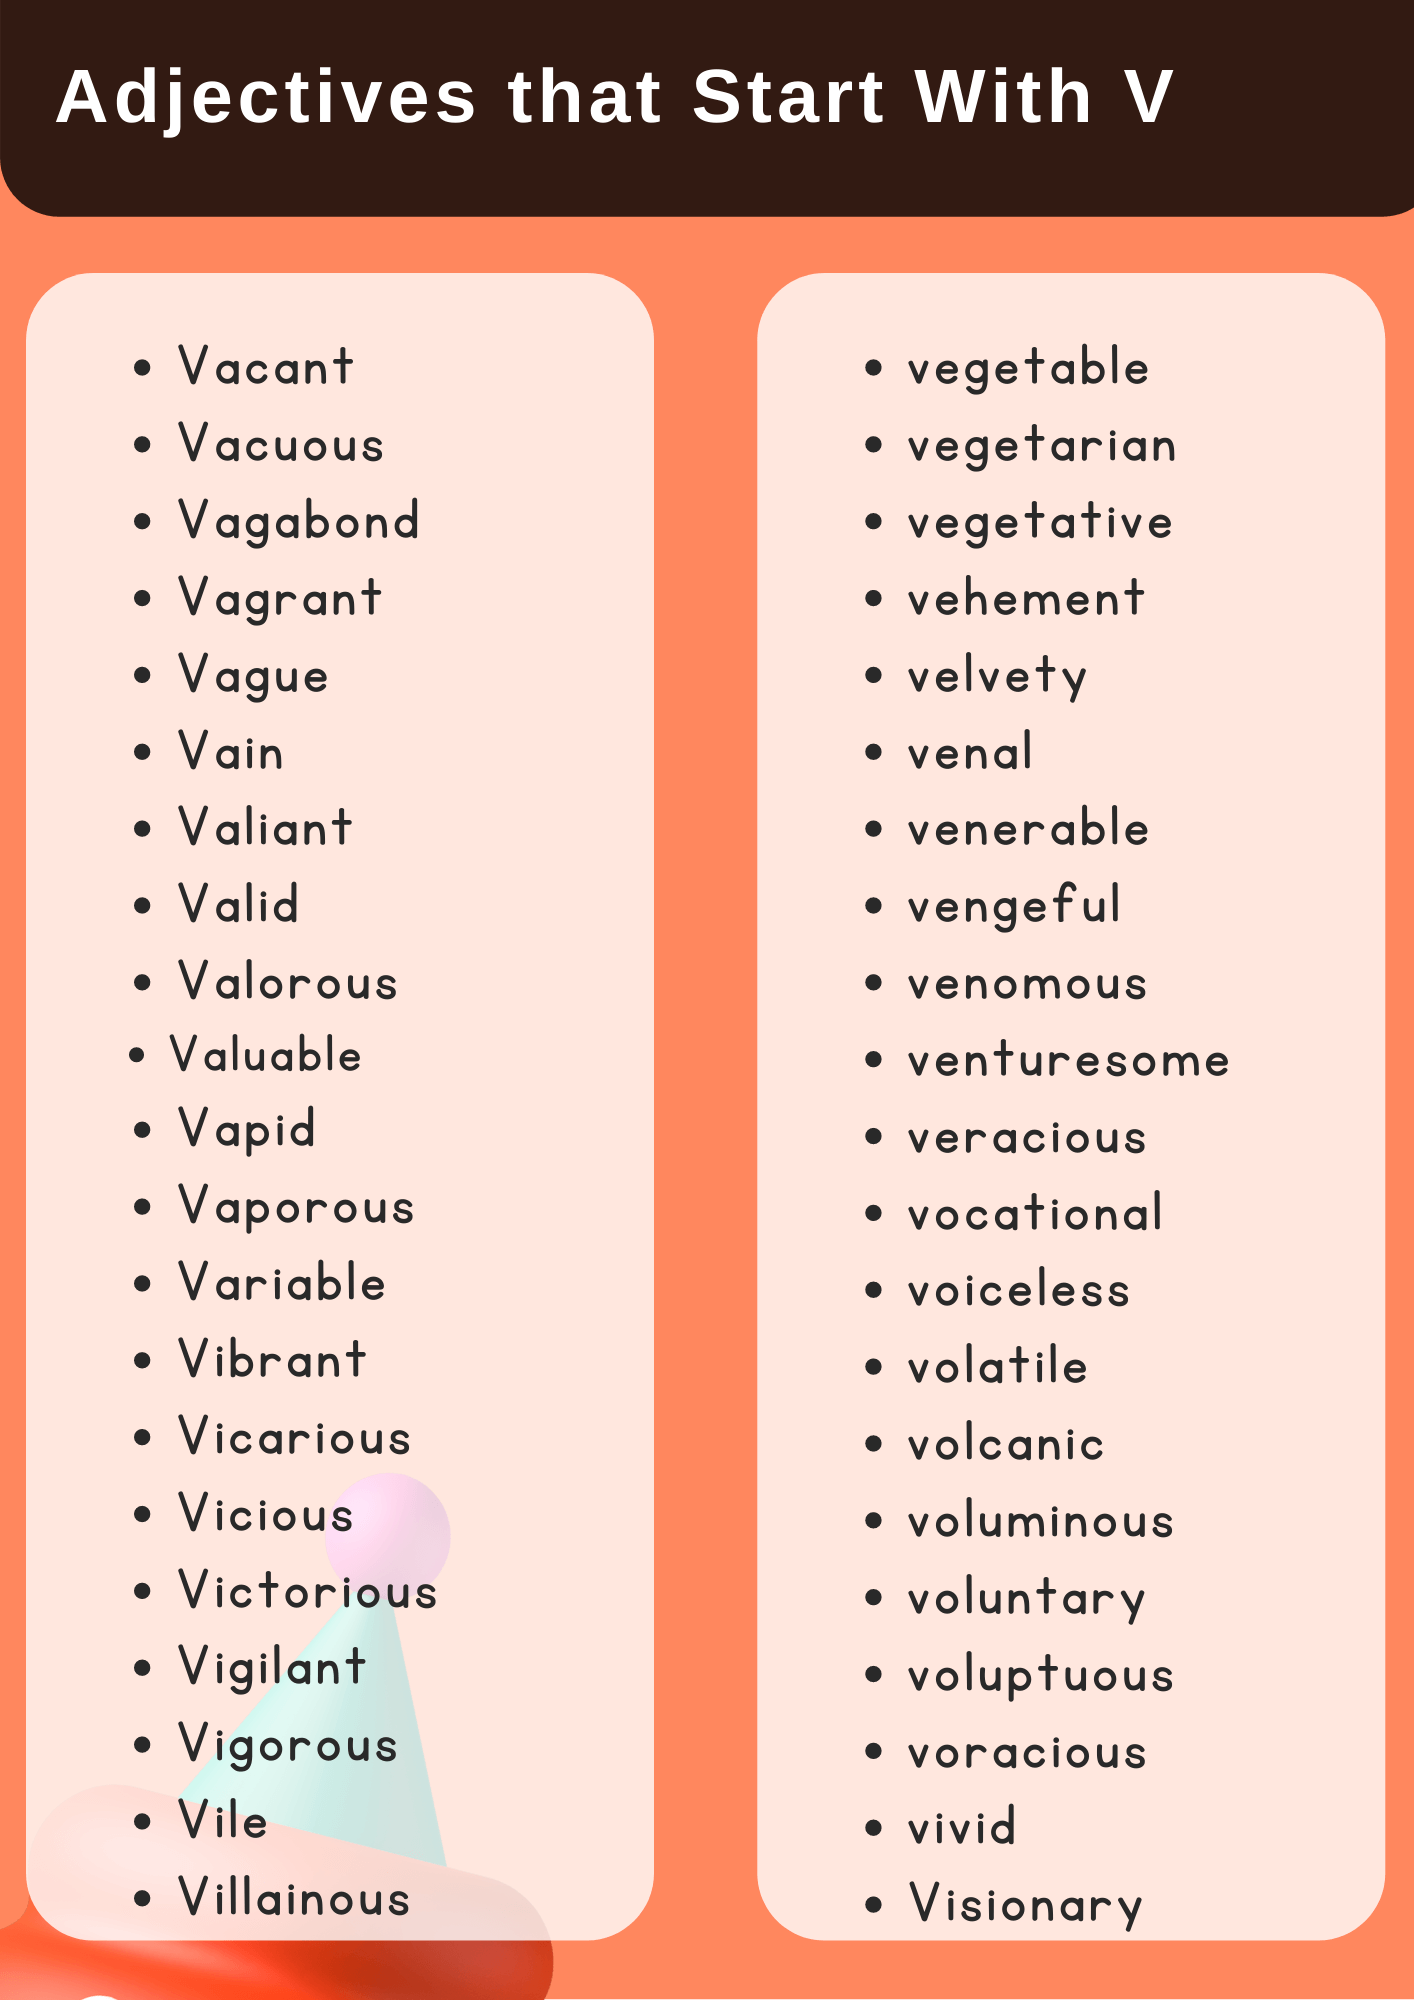 Adjectives that Start with V